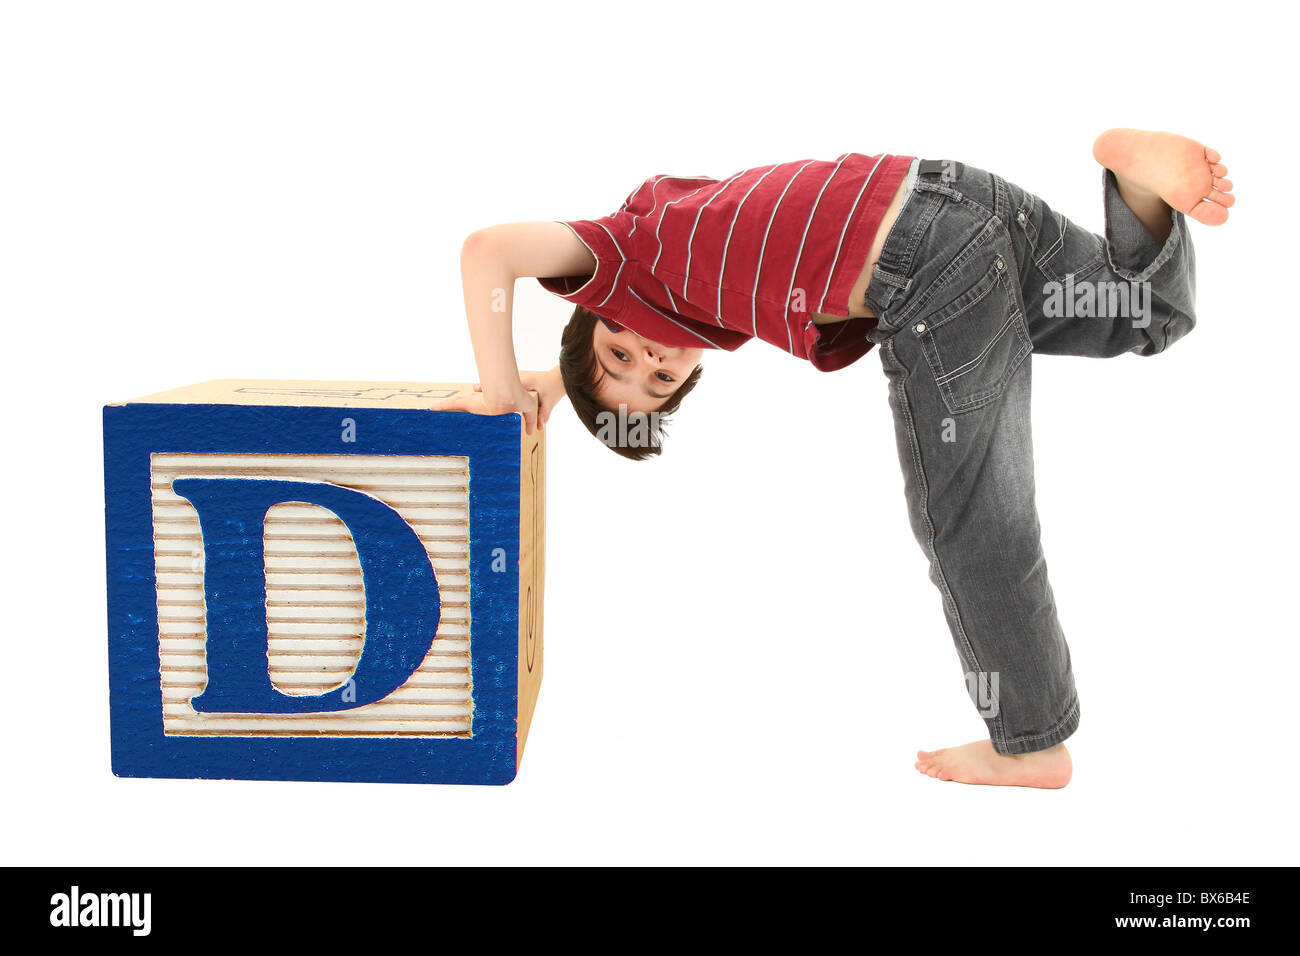 Adorable seven year old boy pushing a wooden block letter D. Stock Photo